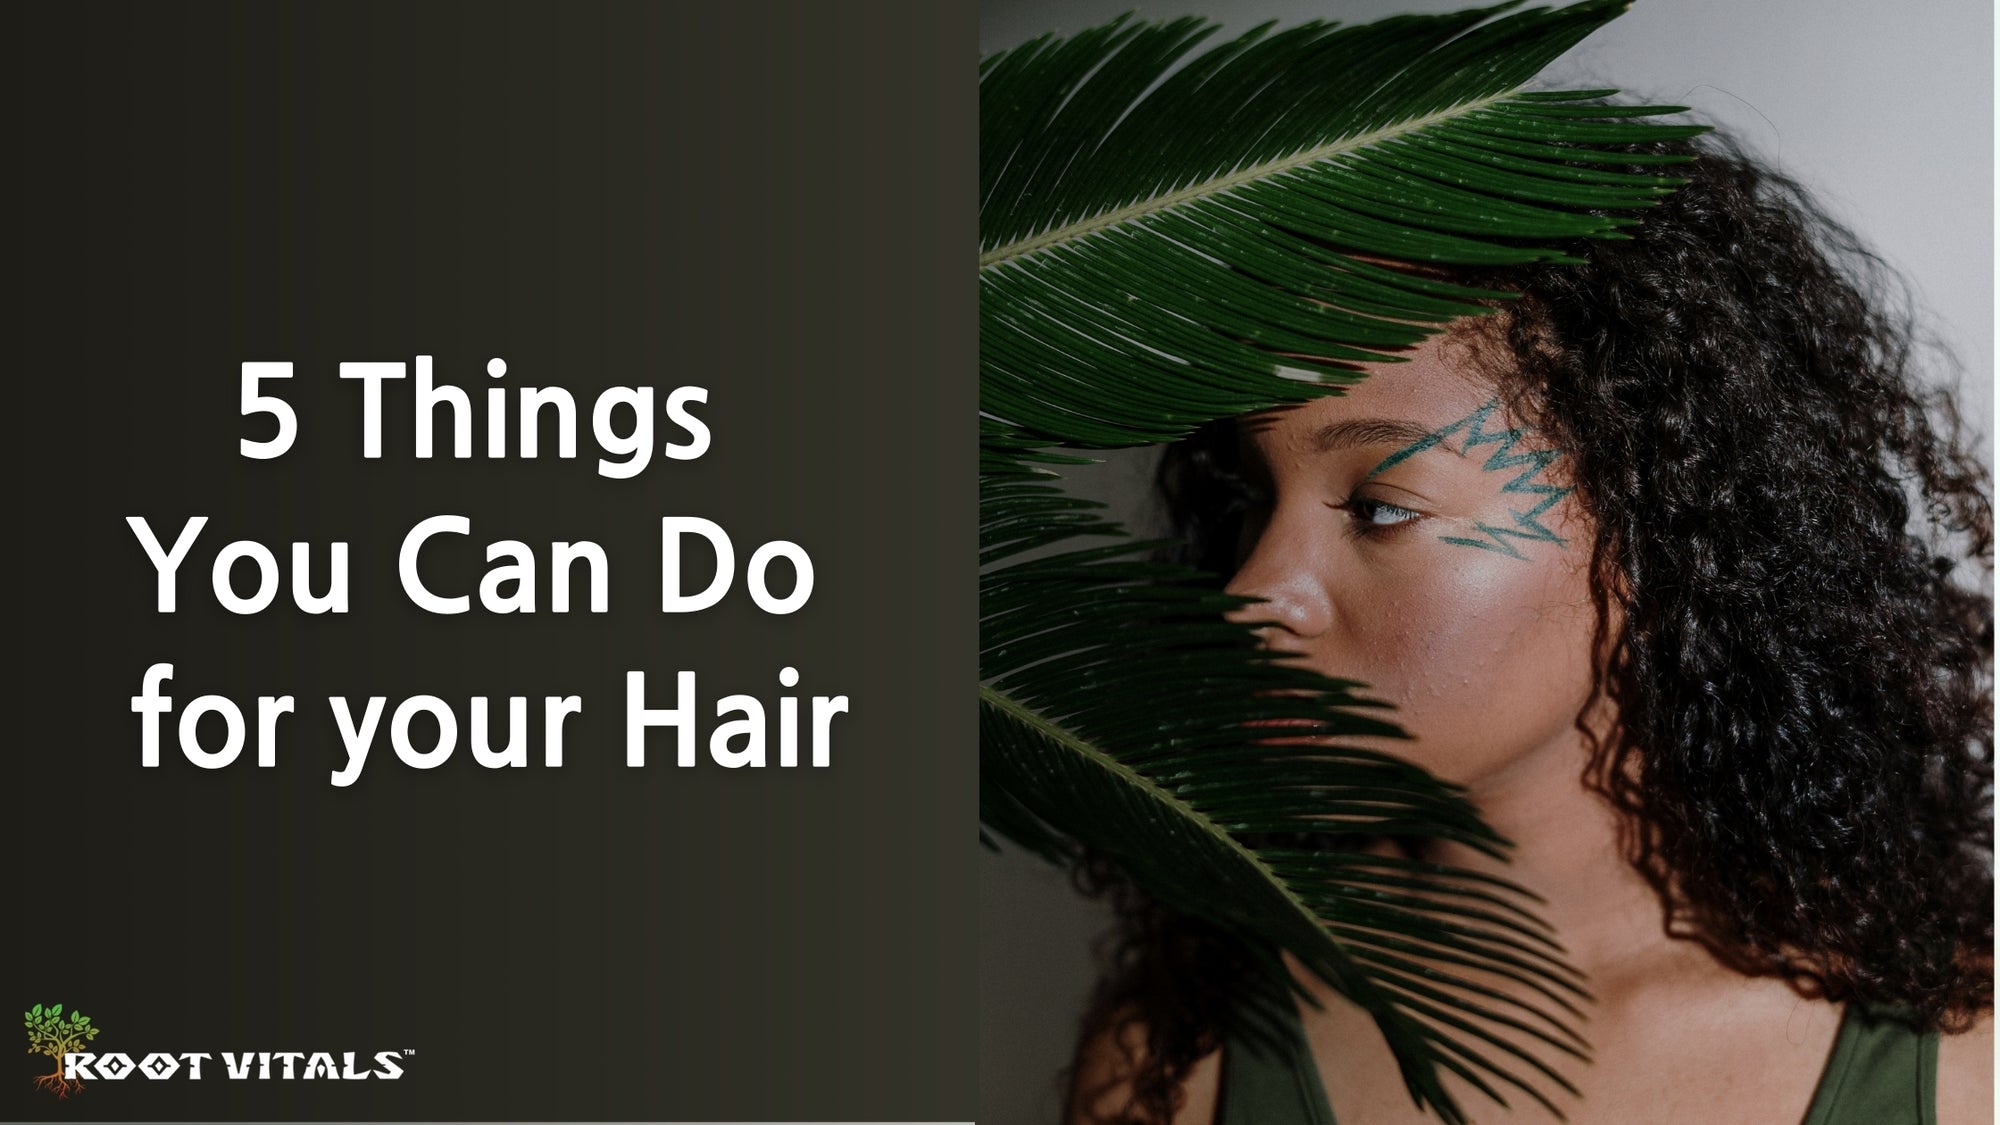 5 tips on how to get healthy hair naturally